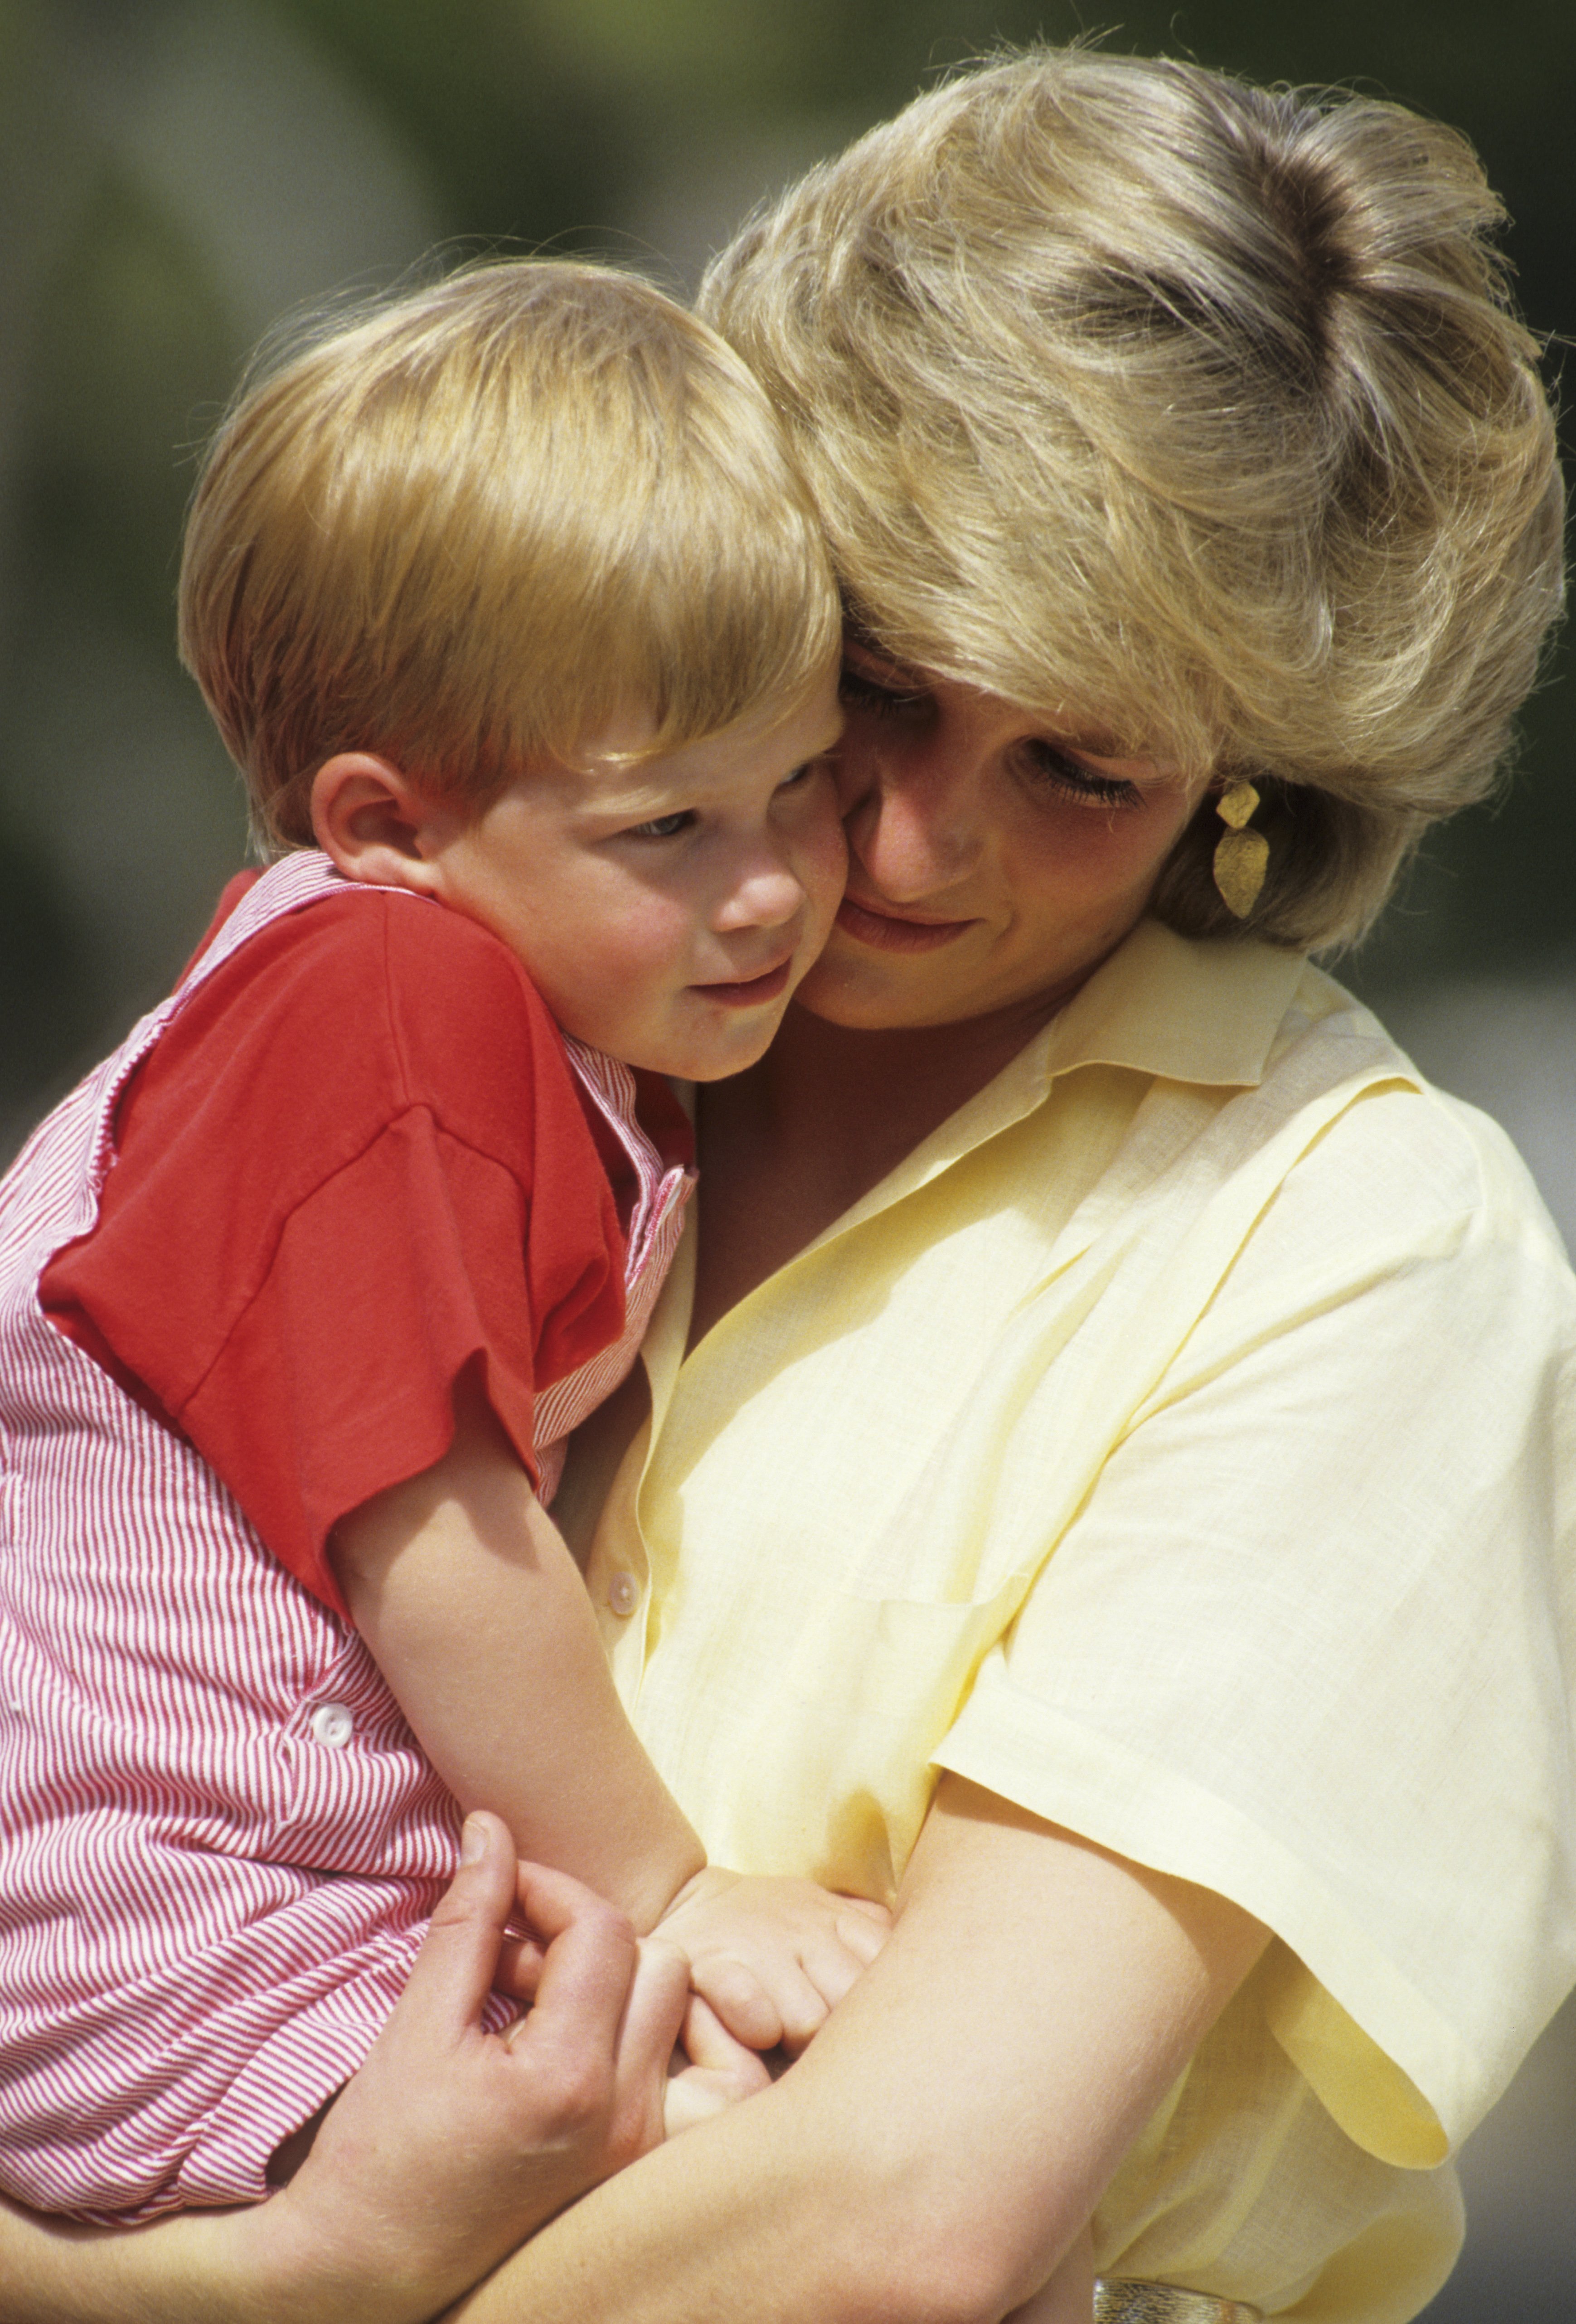 Diana, the Princess of Wales, holding her son Prince Harry while on holiday in Majorca, Spain in 1987 | Photo: Getty Images